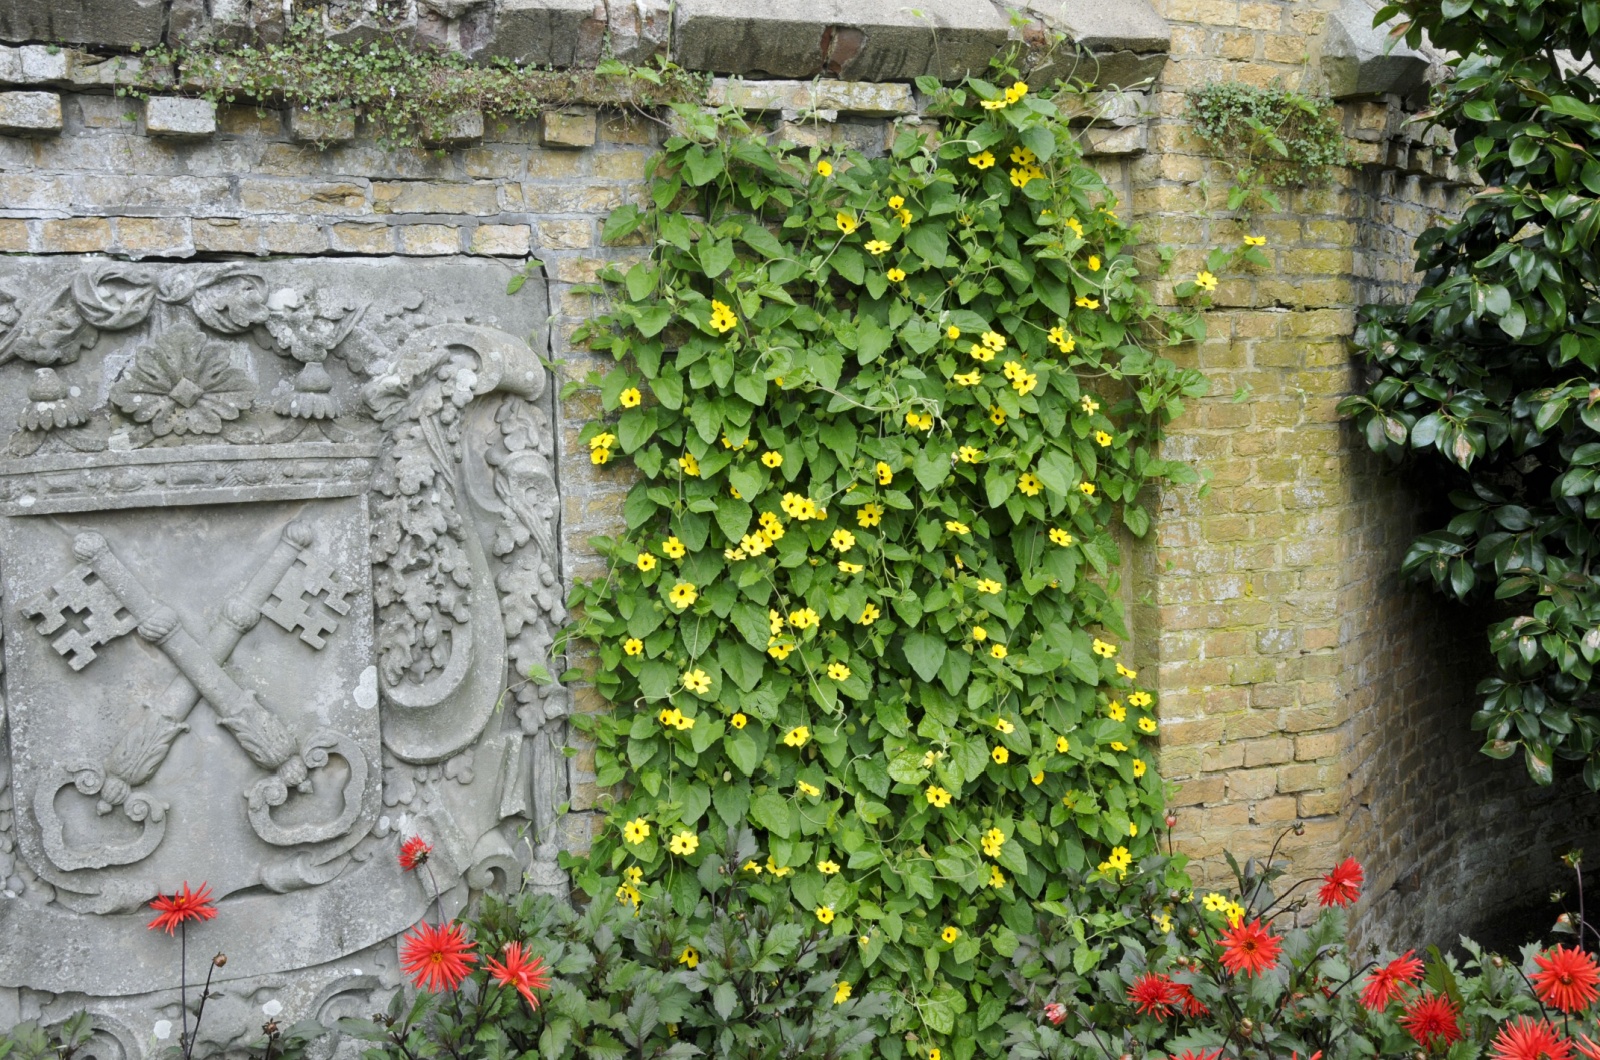 Black eyed Susan vines growing on a wall